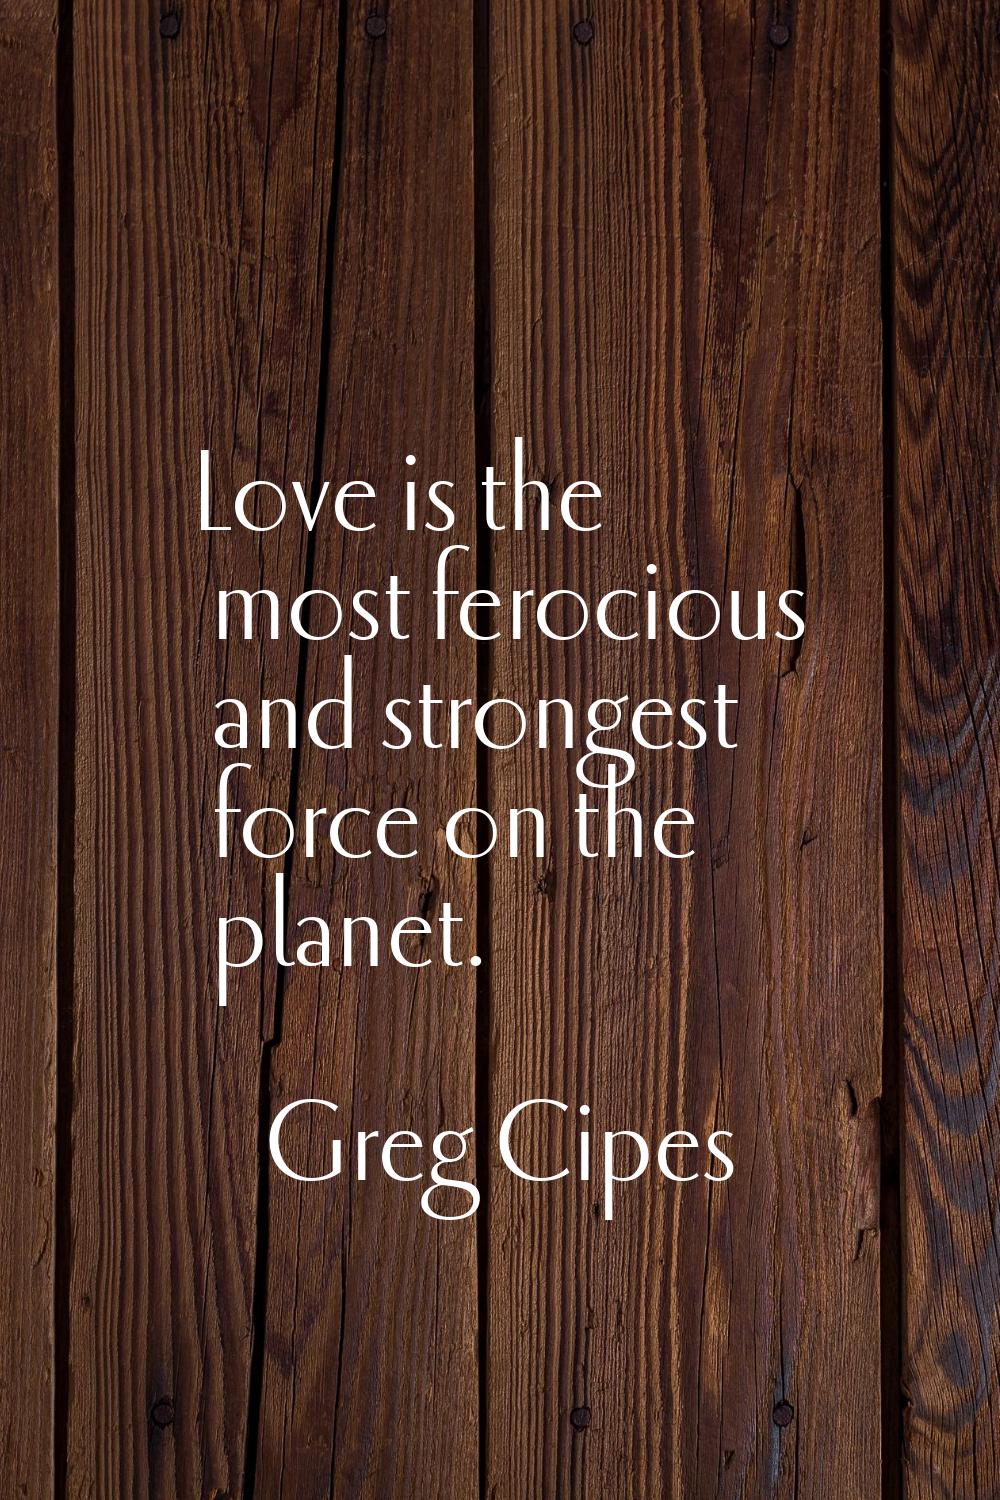 Love is the most ferocious and strongest force on the planet.